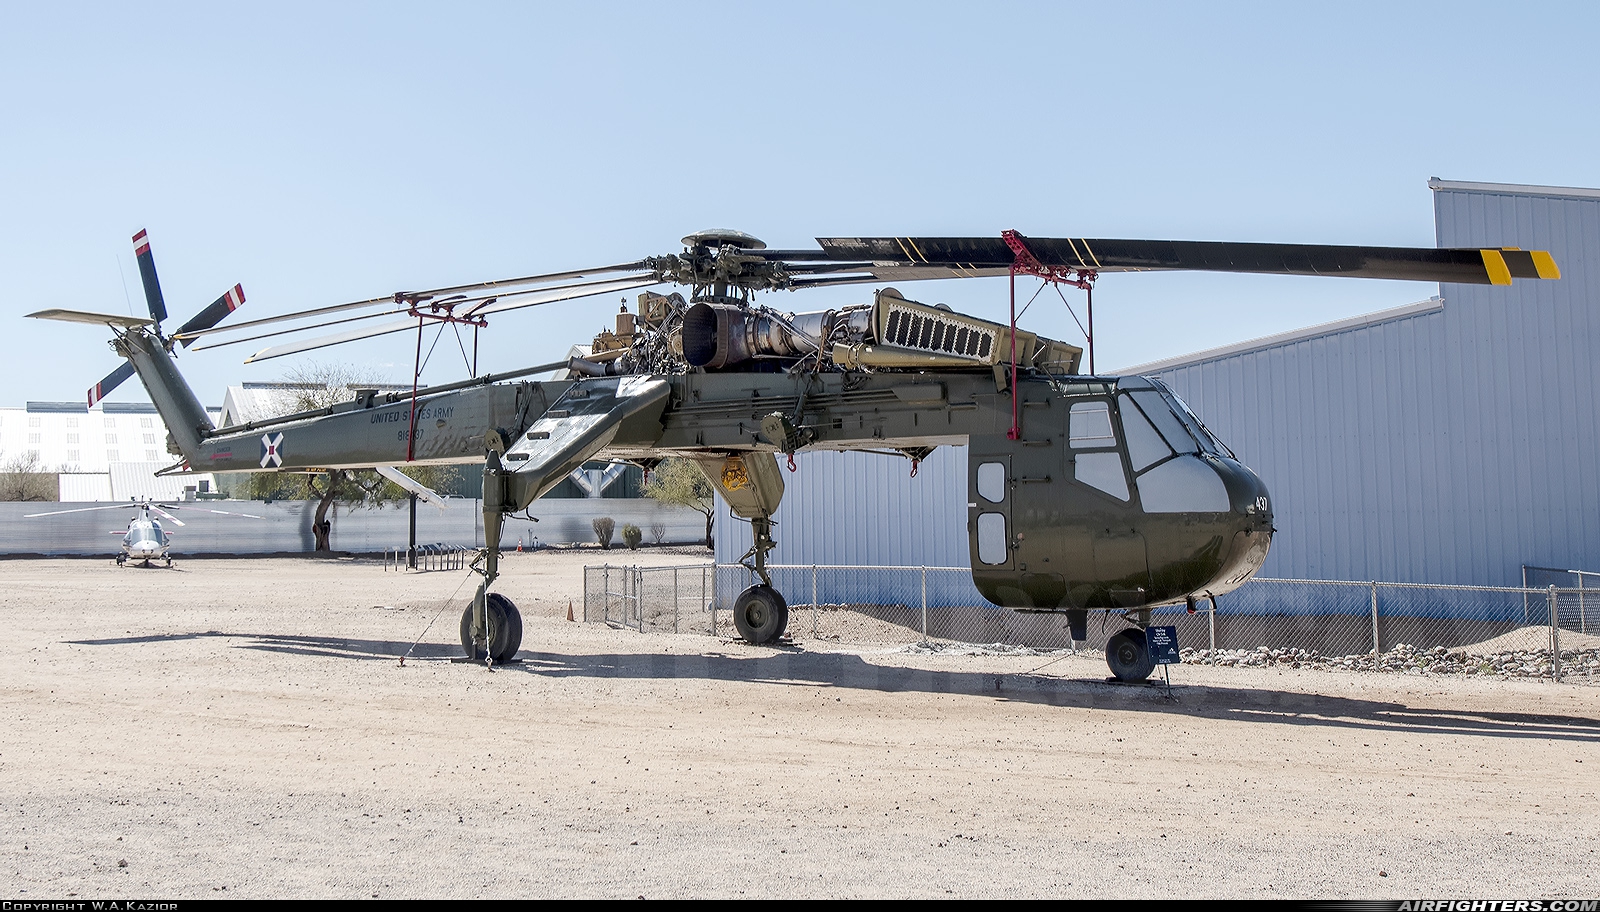 USA - Army Sikorsky CH-54A Tarhe 68-18437 at Tucson - Pima Air and Space Museum, USA